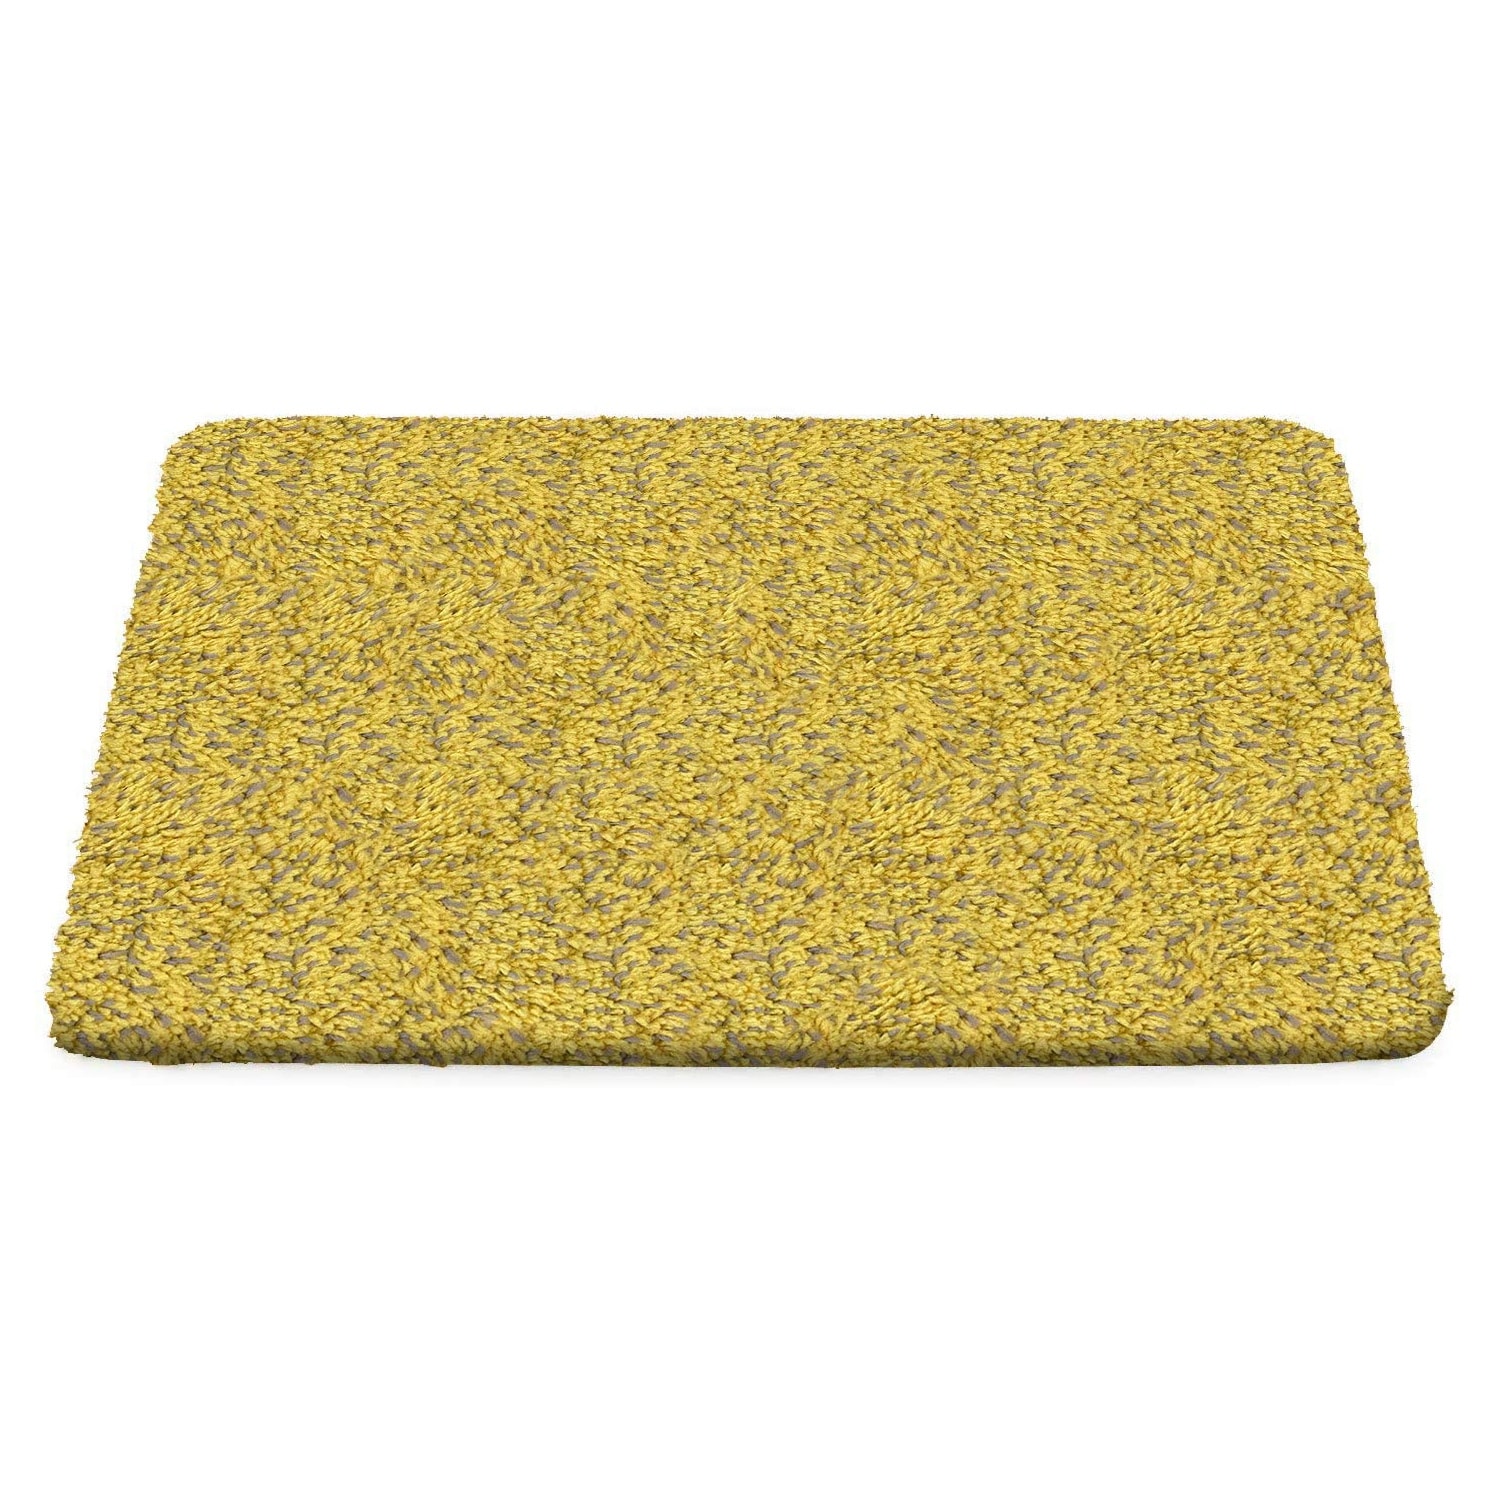 https://ak1.ostkcdn.com/images/products/is/images/direct/b71c0859a73d7a1a442087b2165f9ee4773765fb/Door-Mat%2C-Entry-Rug%2C-Super-Absorbent%2C-20-X-30.jpg